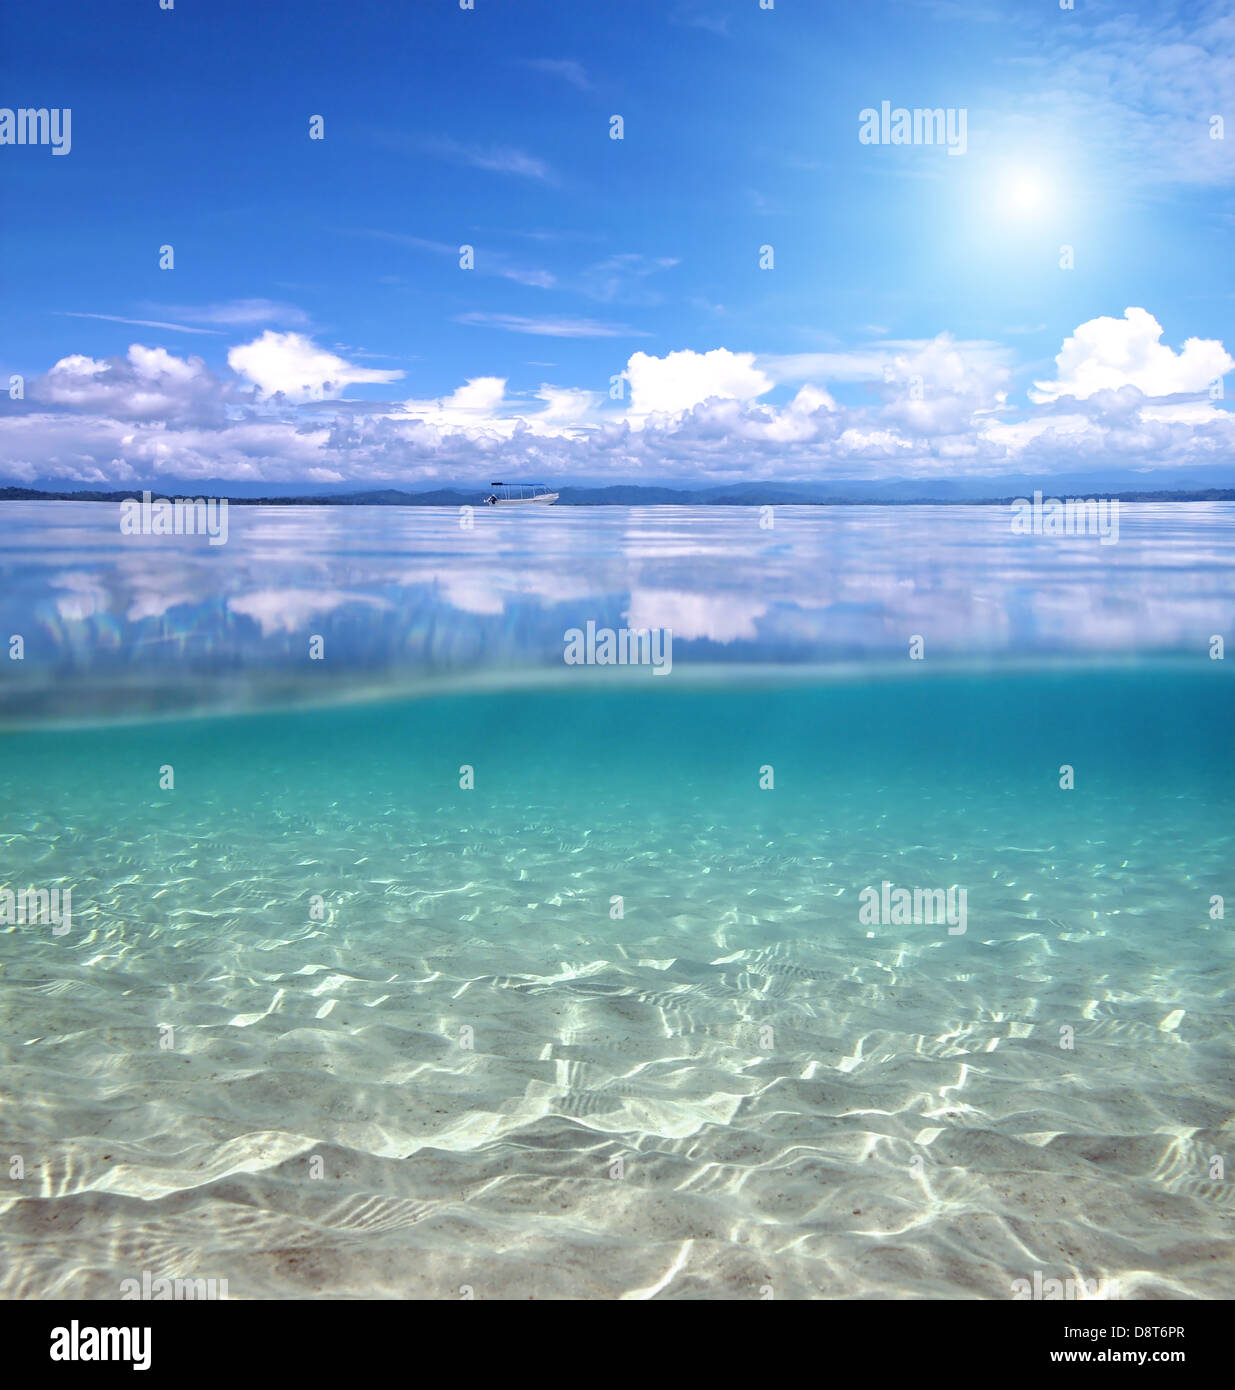 Split view over and under water in the Caribbean sea with clouds reflected on surface and a sandy seabed Stock Photo